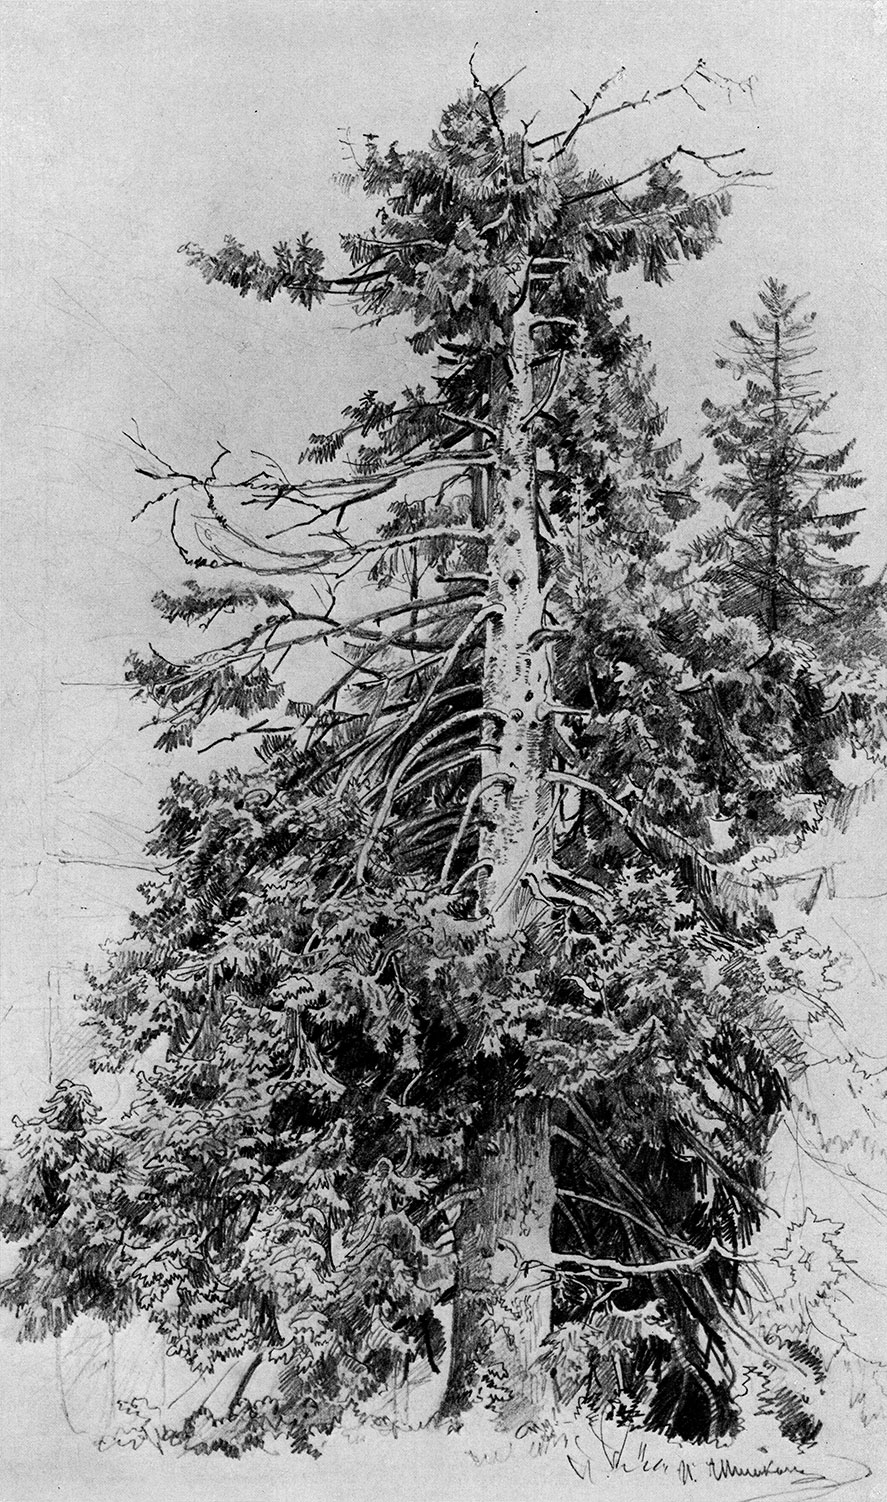 90. Fir-tree. 1870s. Lead pencil on paper. 48.5X30 cm. Museum of the Academy of Arts, Leningrad